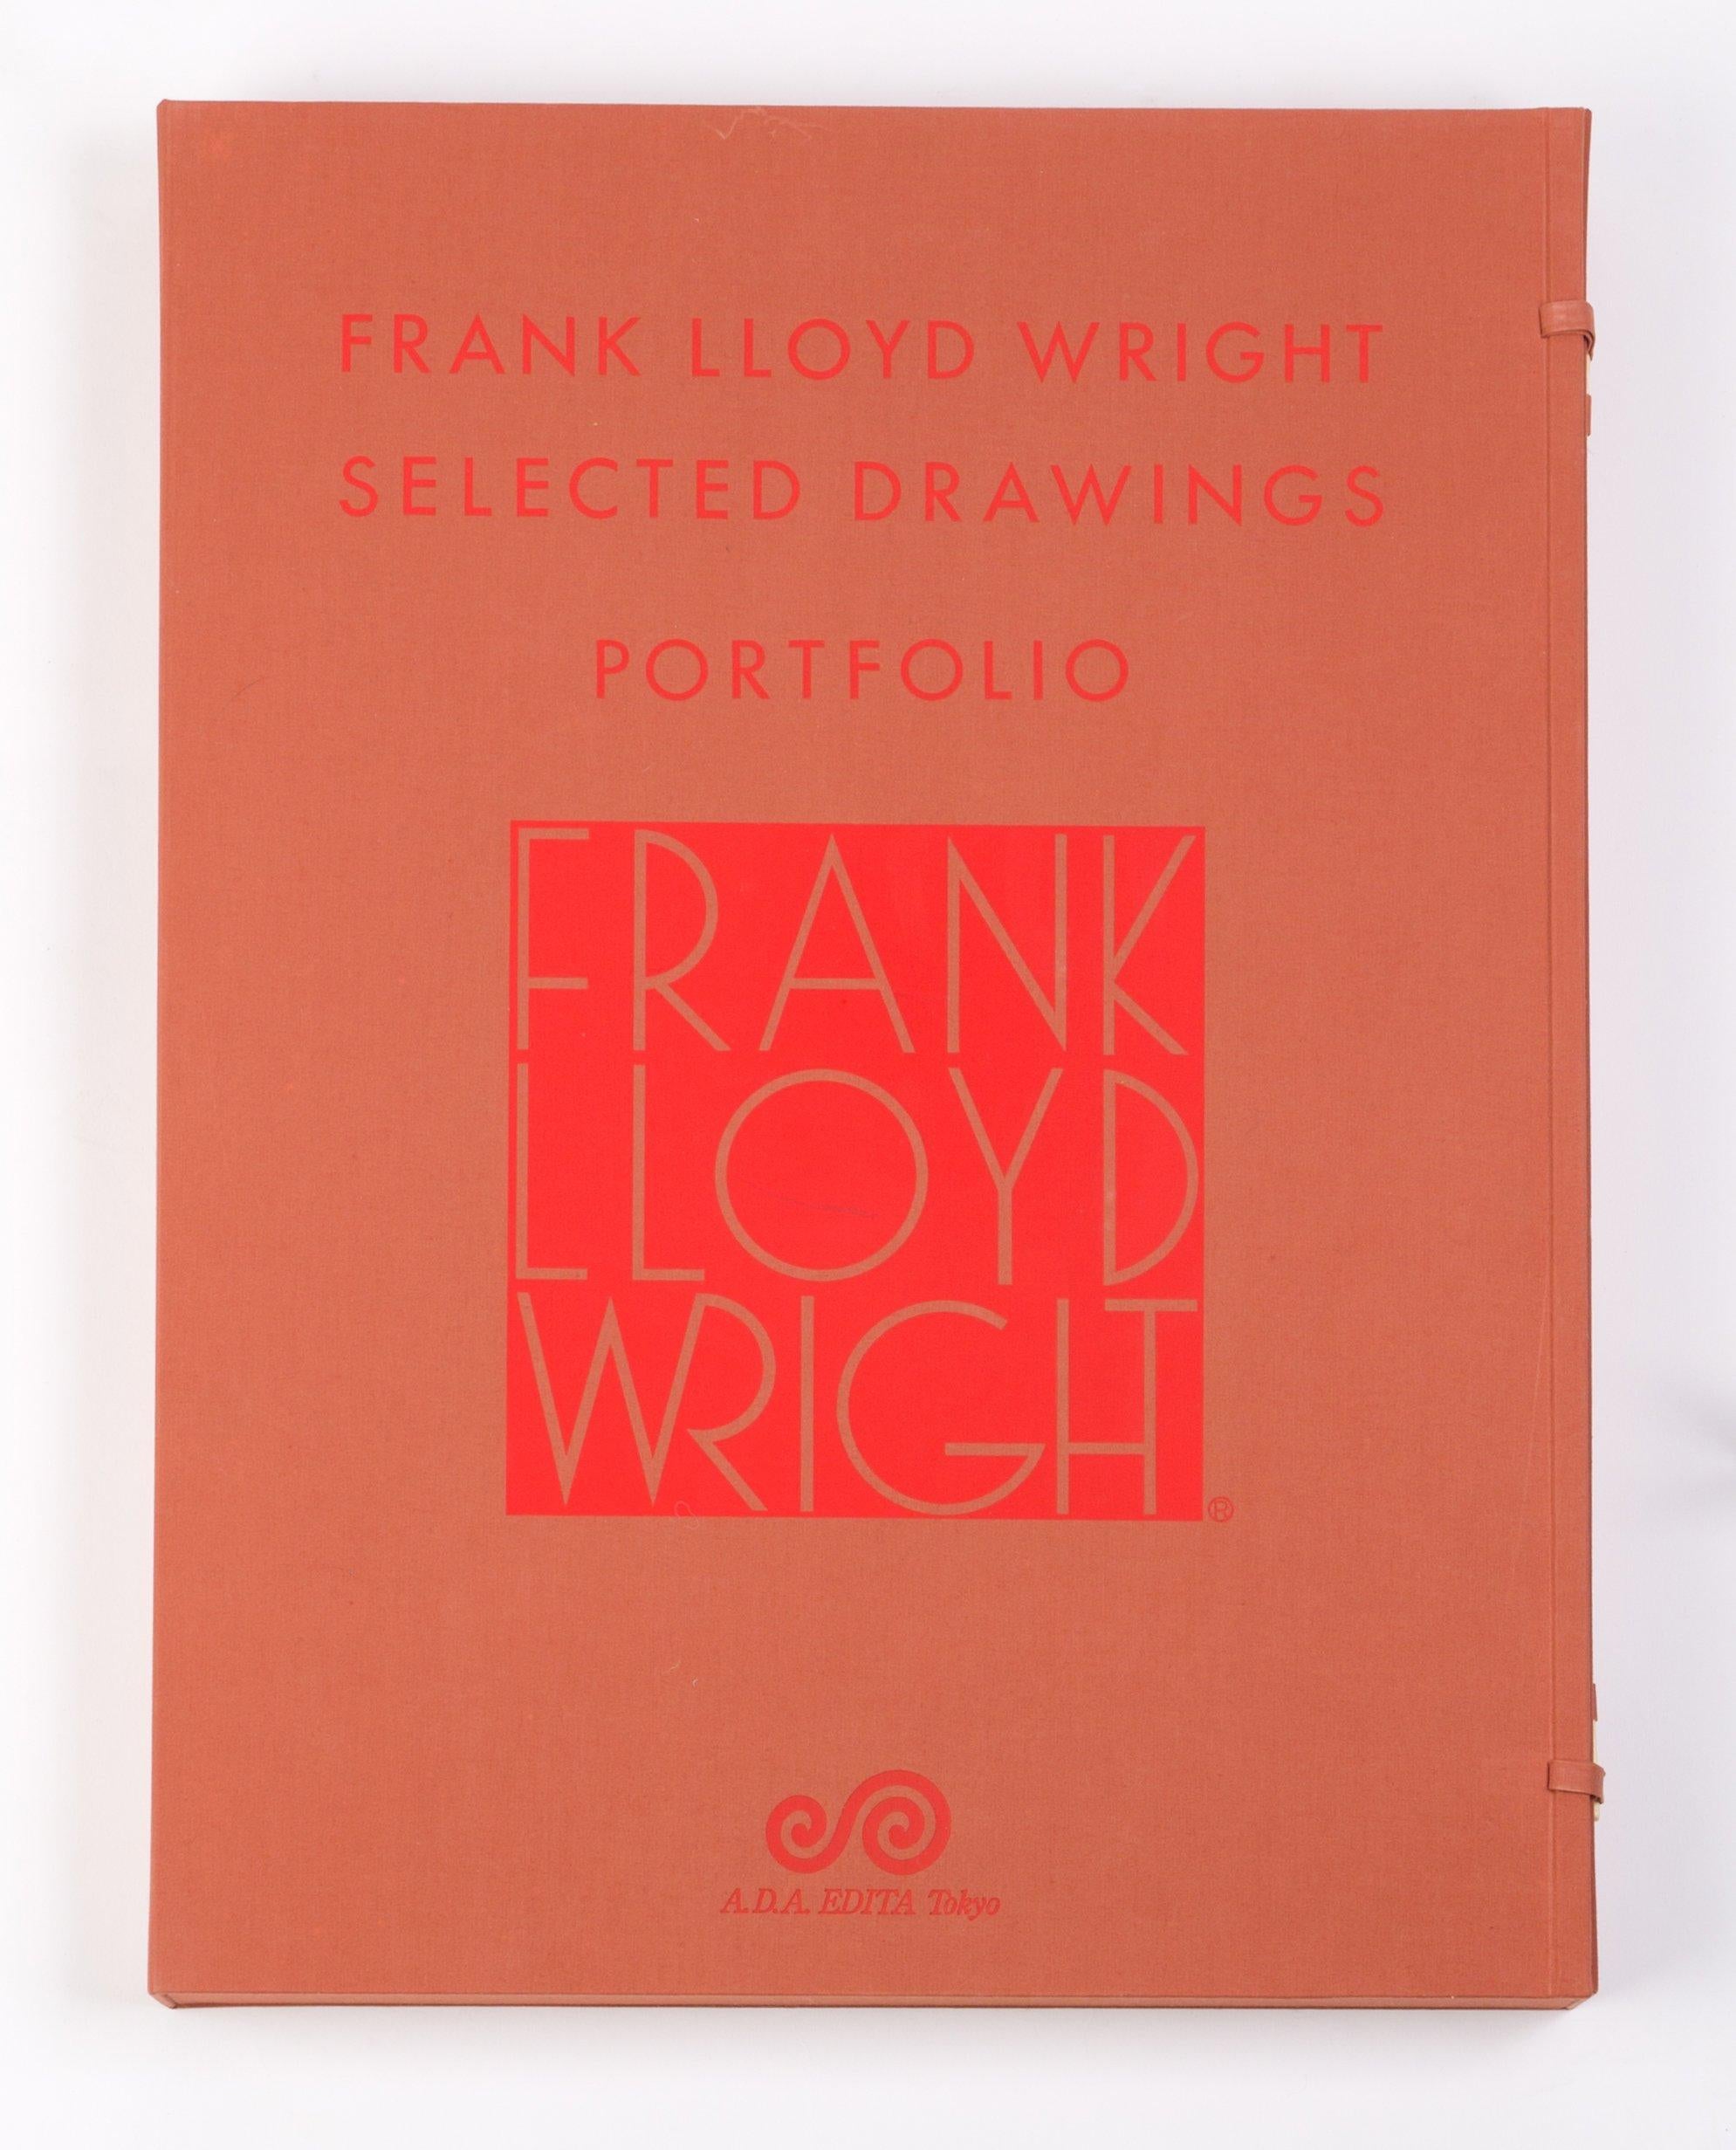 Wright, Frank Lloyd. Selected drawings portfolio volume 3. Tokyo: A.D.A. Editia, 1982. Edition #A447/500. Large folio, 50 color plates, contained within a terracotta cloth case.

Presented is volume 3 of Frank Lloyd Wright’s selected drawing